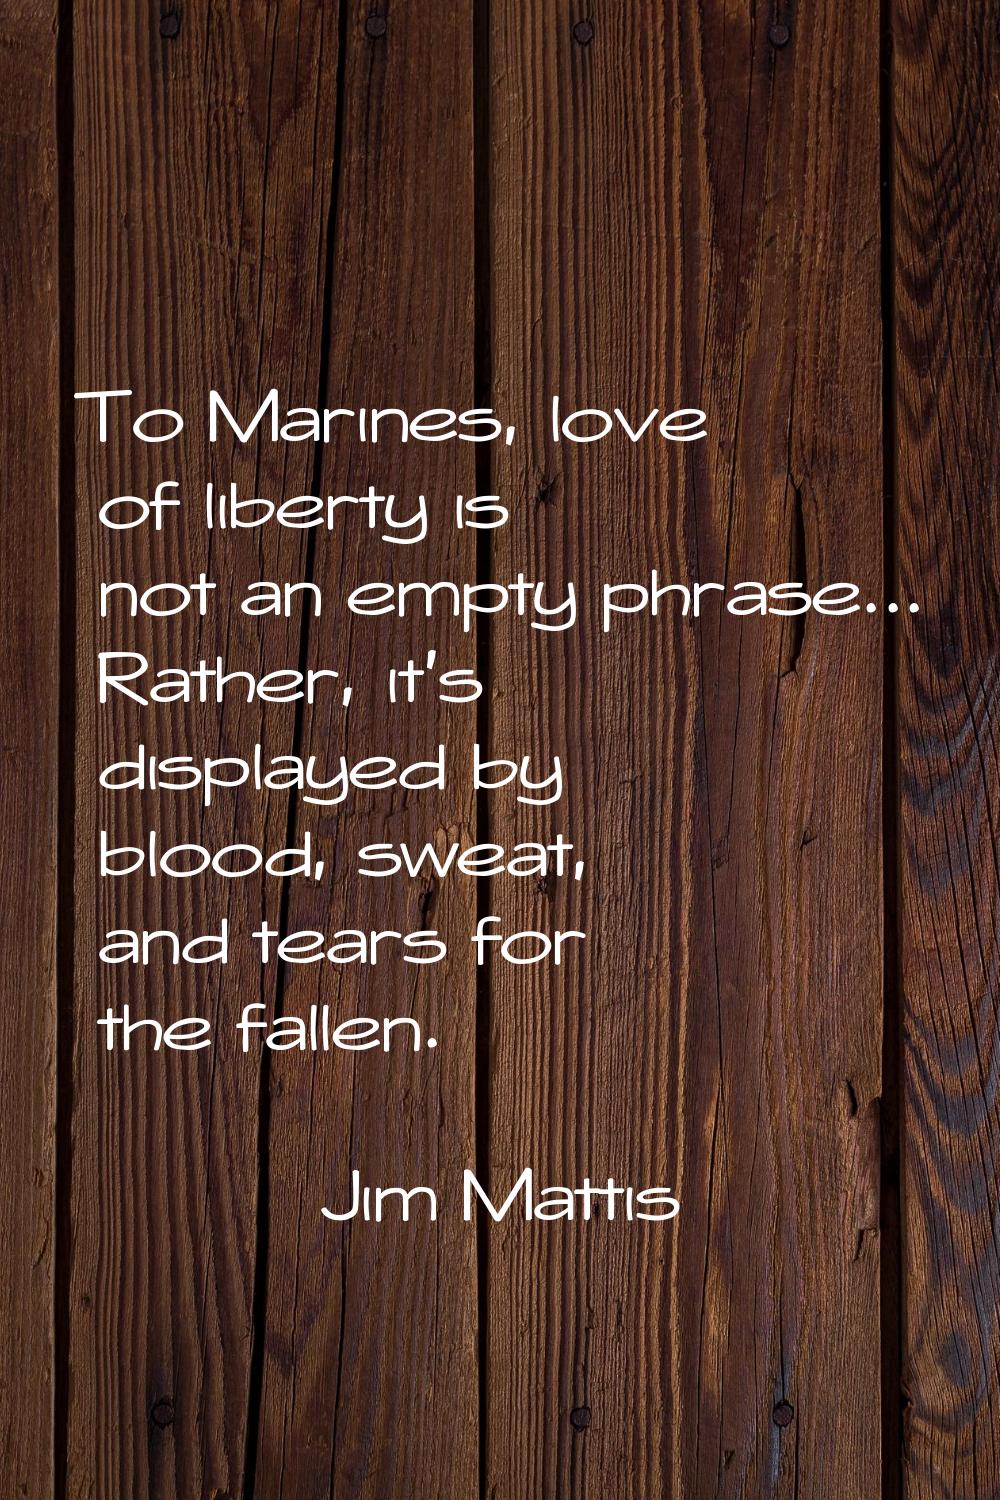 To Marines, love of liberty is not an empty phrase... Rather, it's displayed by blood, sweat, and t